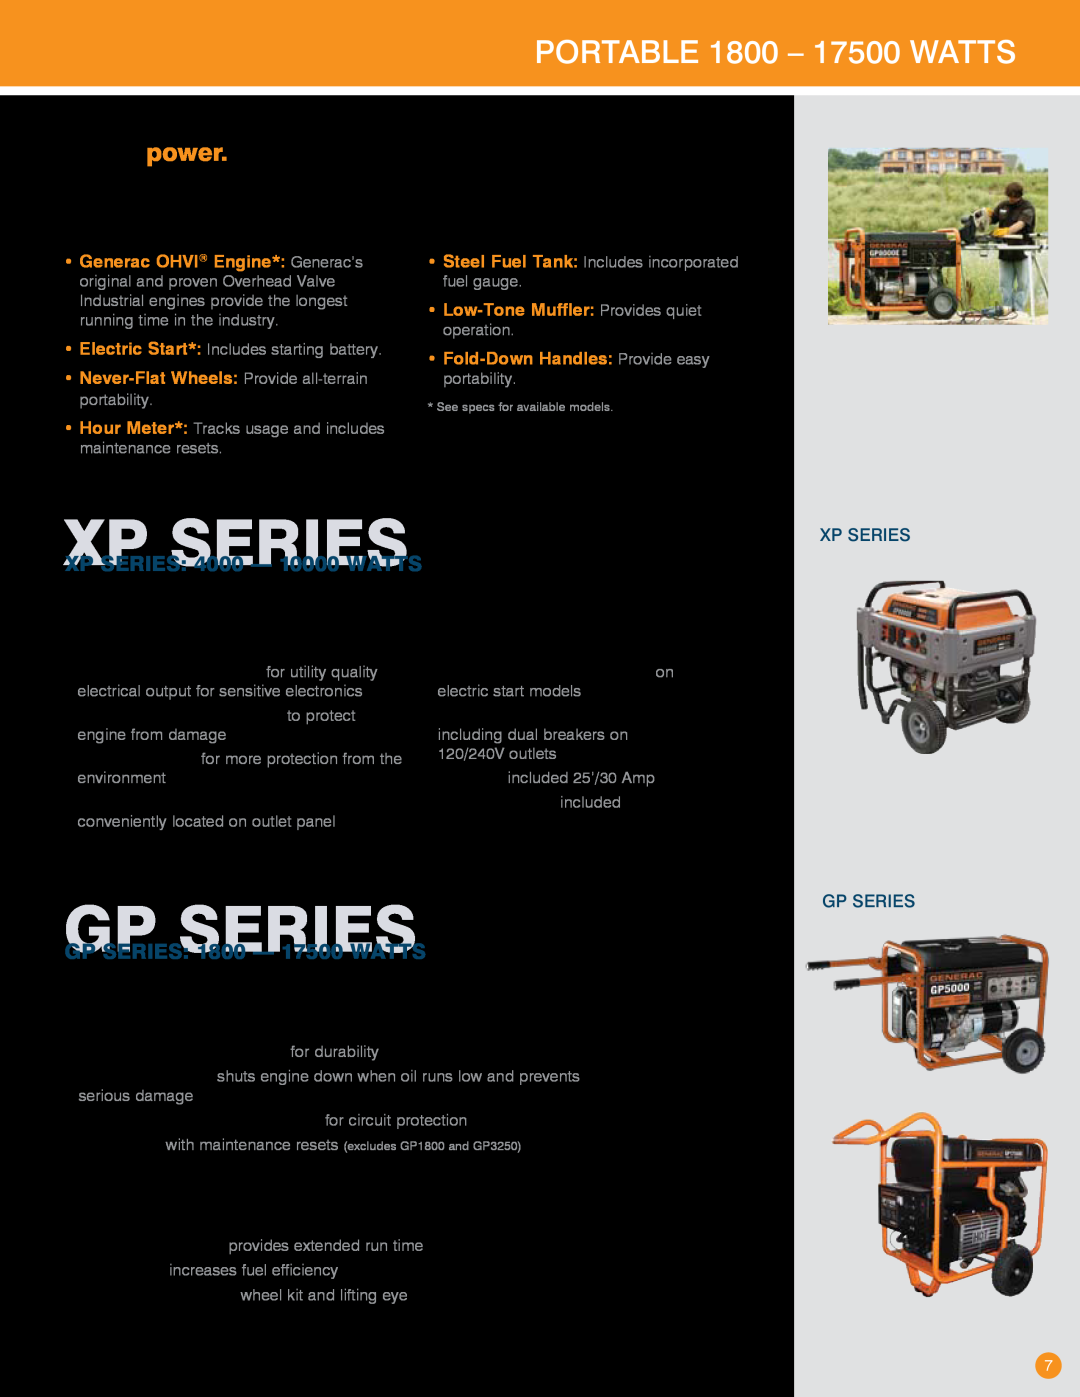 Generac Power Systems Transfer Switches and Accessories manual xp series, gp series, Portable 1800 - 17500 Watts, XP Series 